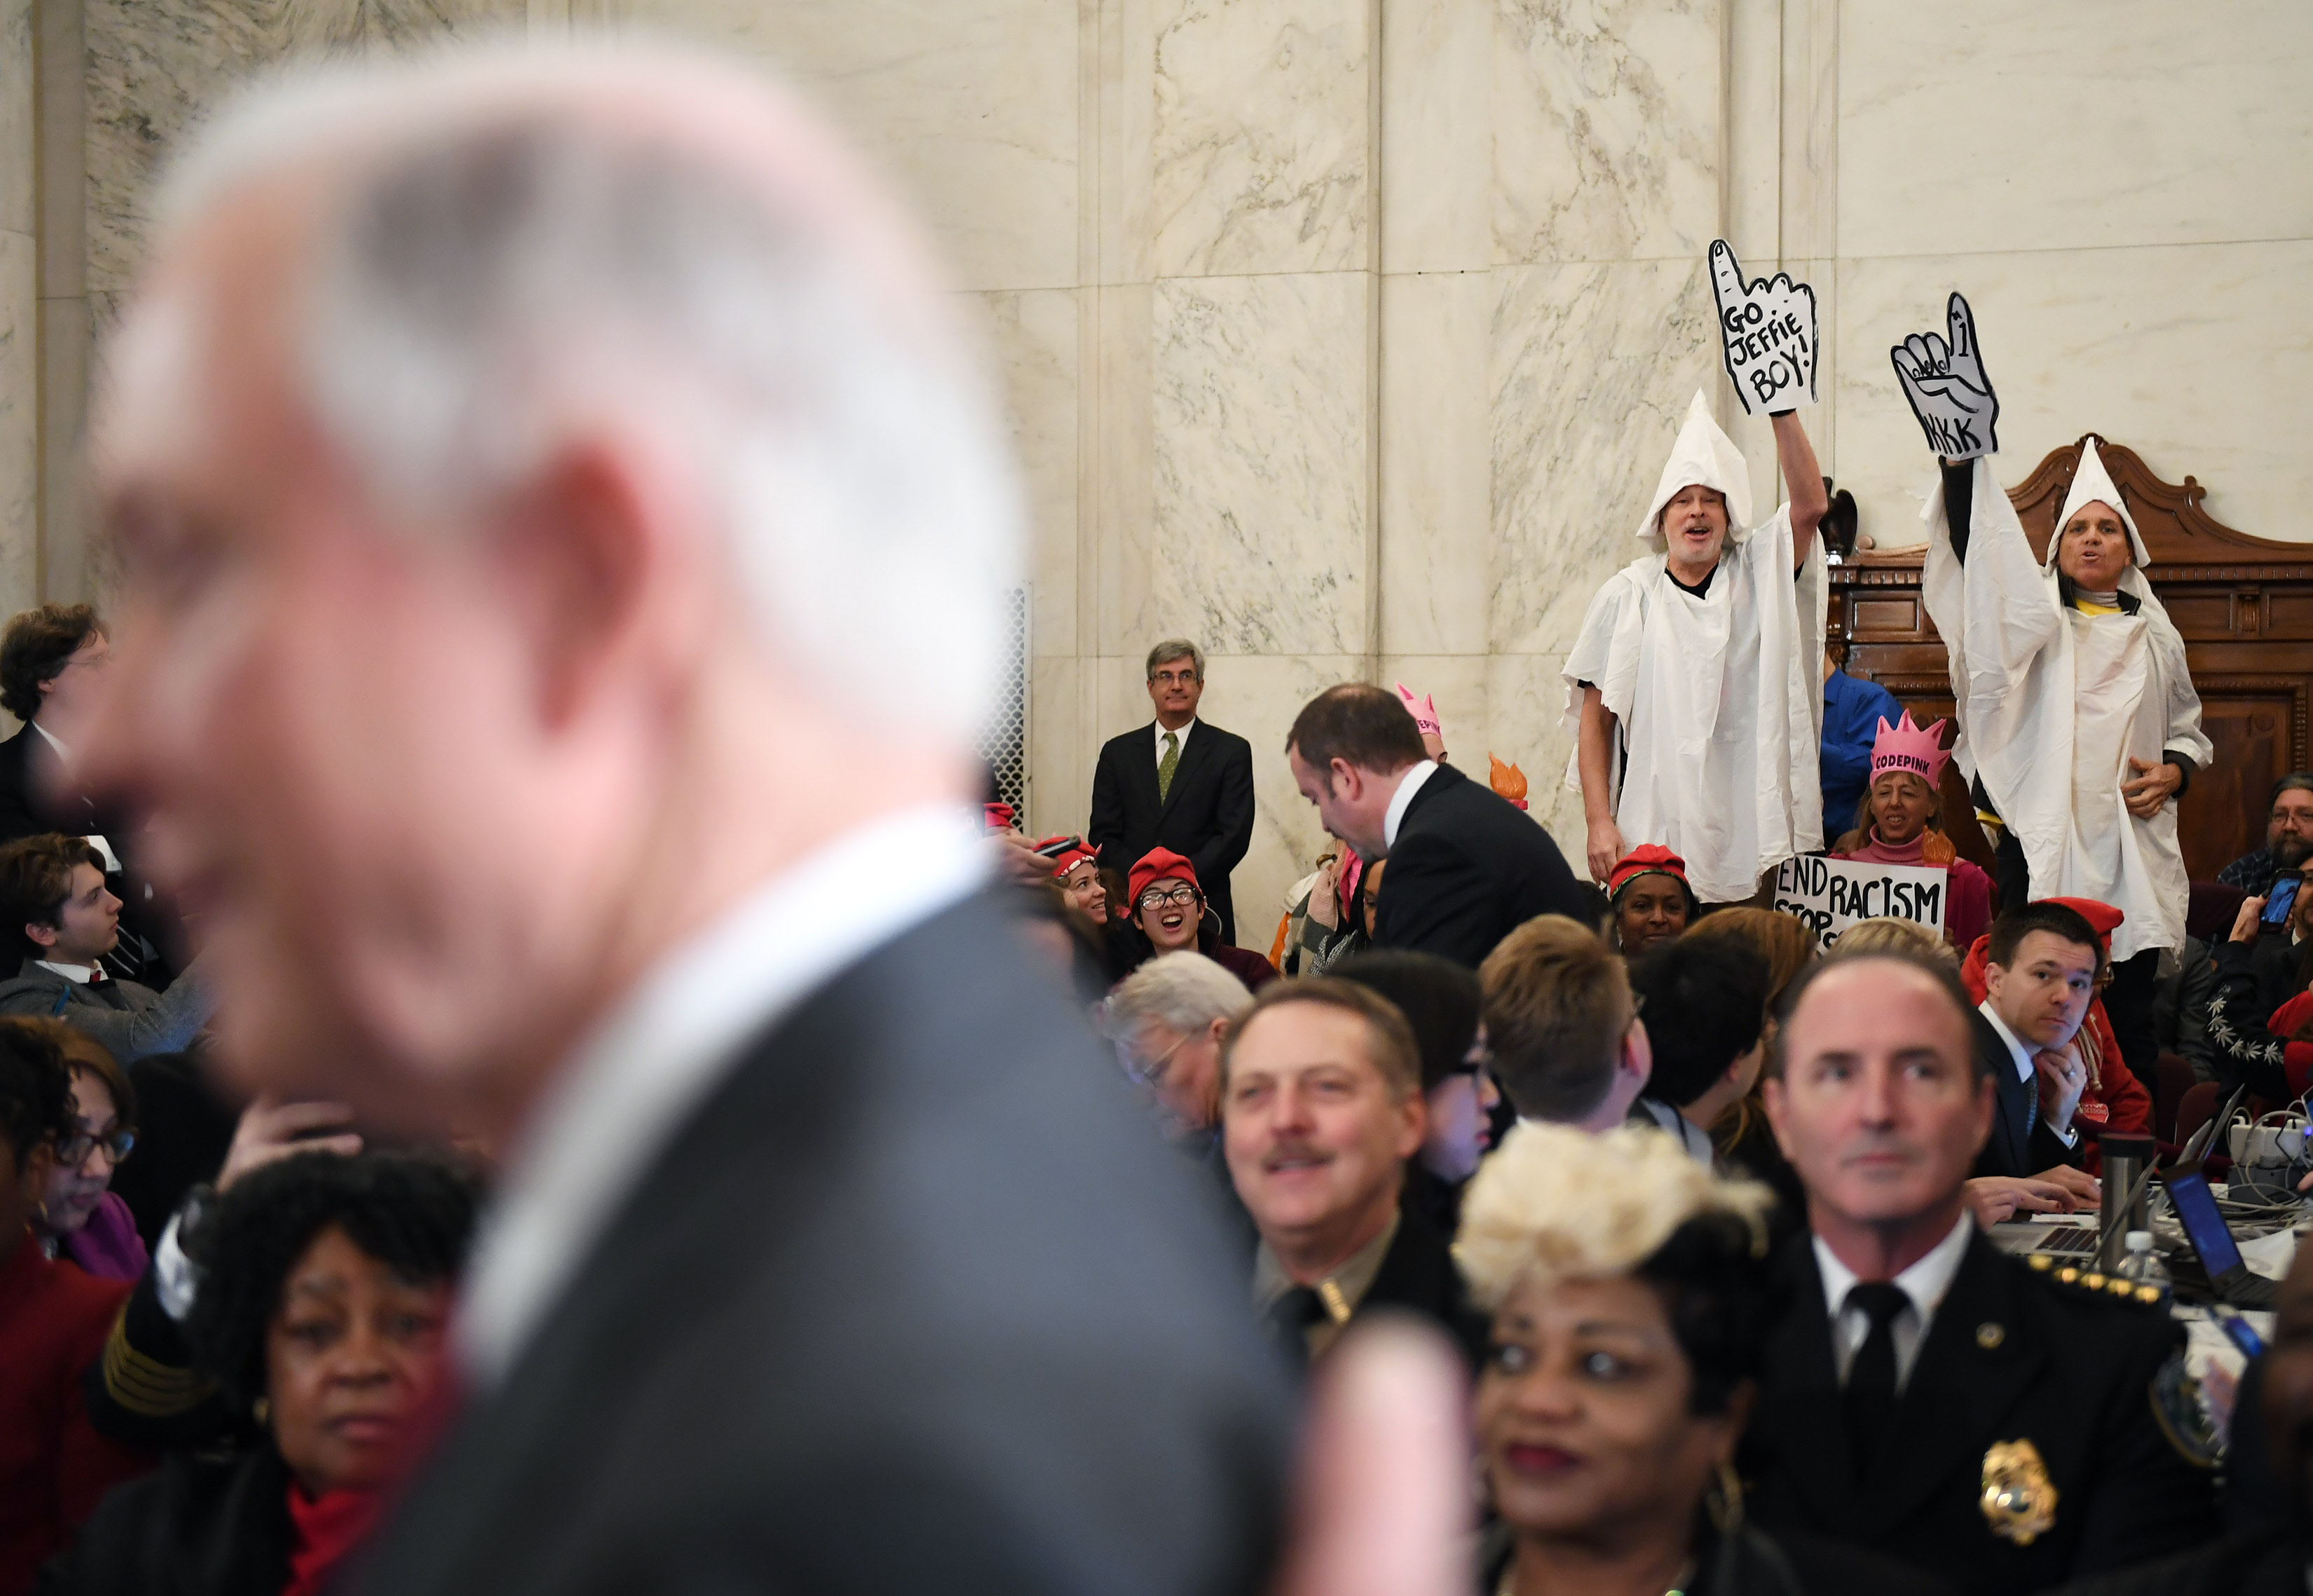 Senator Jeff Sessions (R-AL) is seen before his Attorney General confirmation hearing as Code Pink demonstrators dressed as KKK members stand up and call to the Senator at the Russell Senate Office Building on Tuesday January 10, 2017 in Washington, DC. (Photograph by Matt McClain—Getty/The Washington Post)